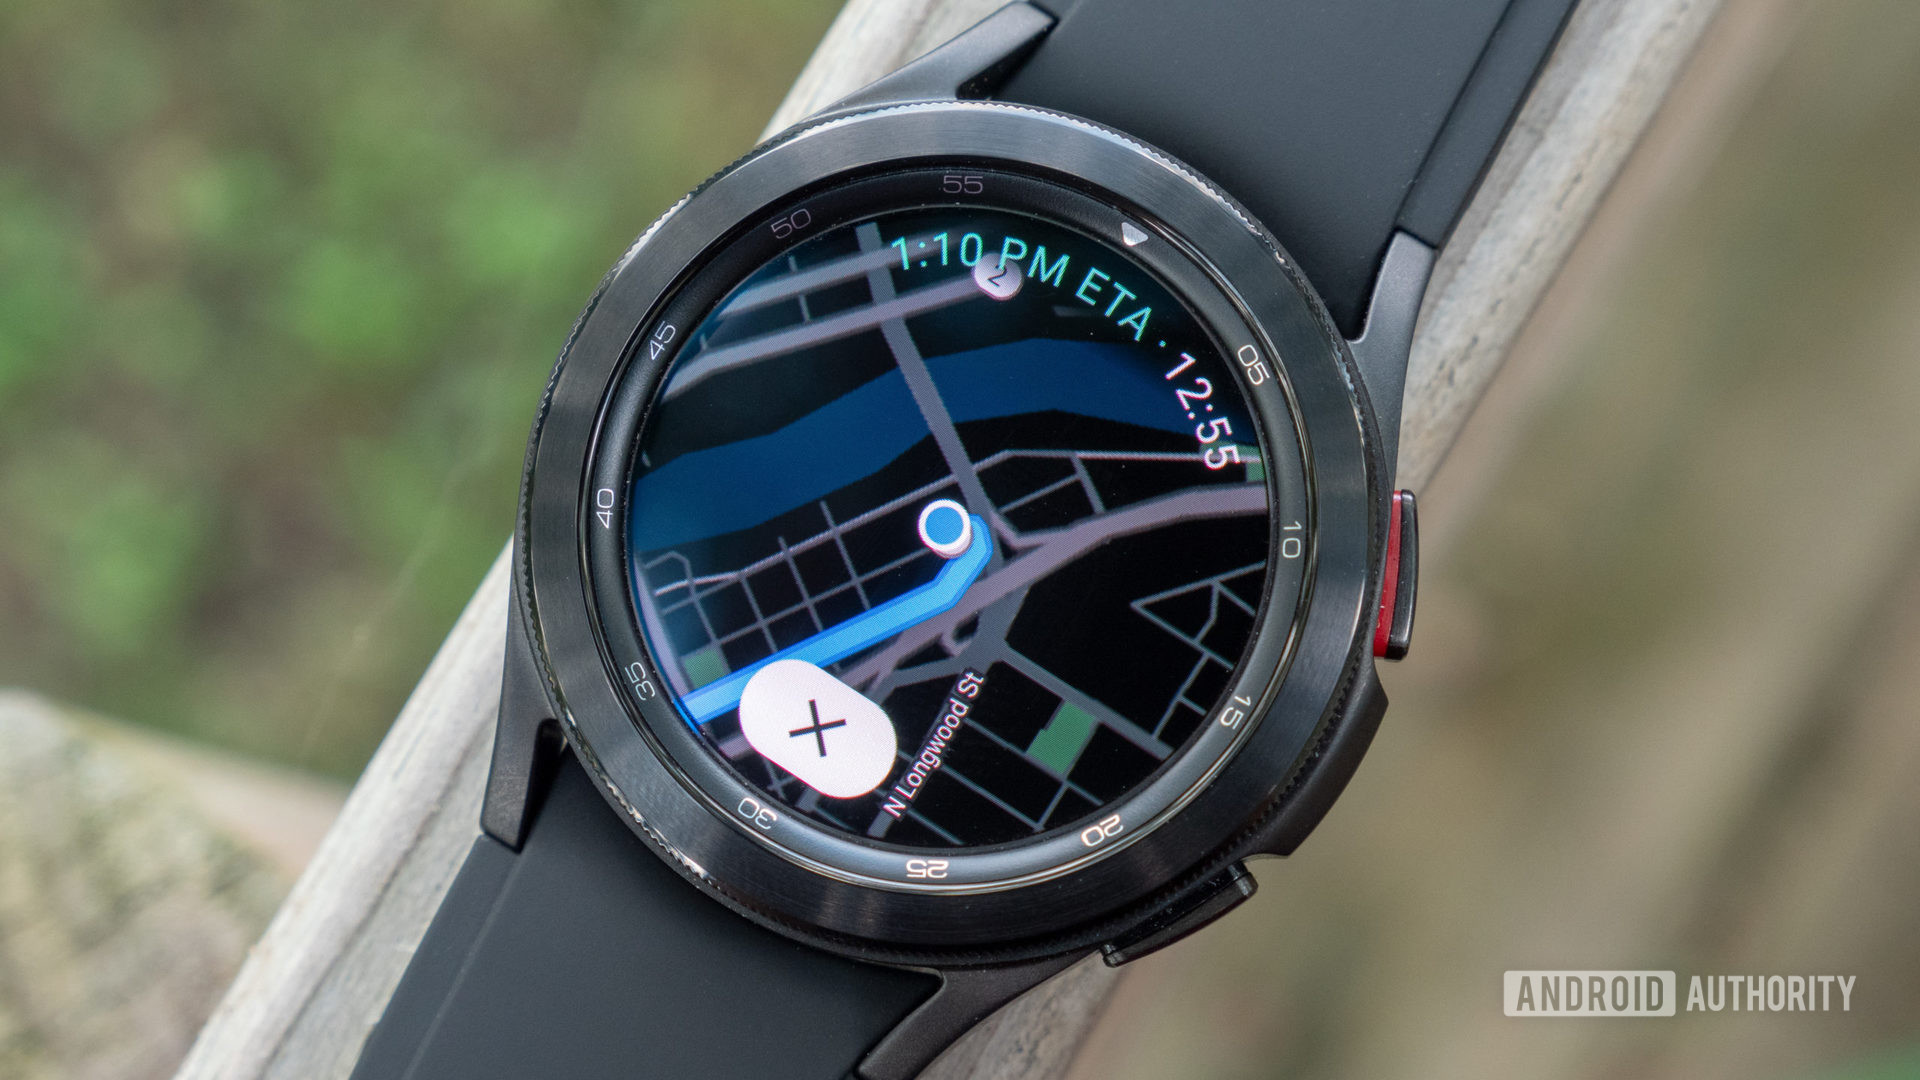 The new Google Maps application on the Samsung Galaxy Watch 4.